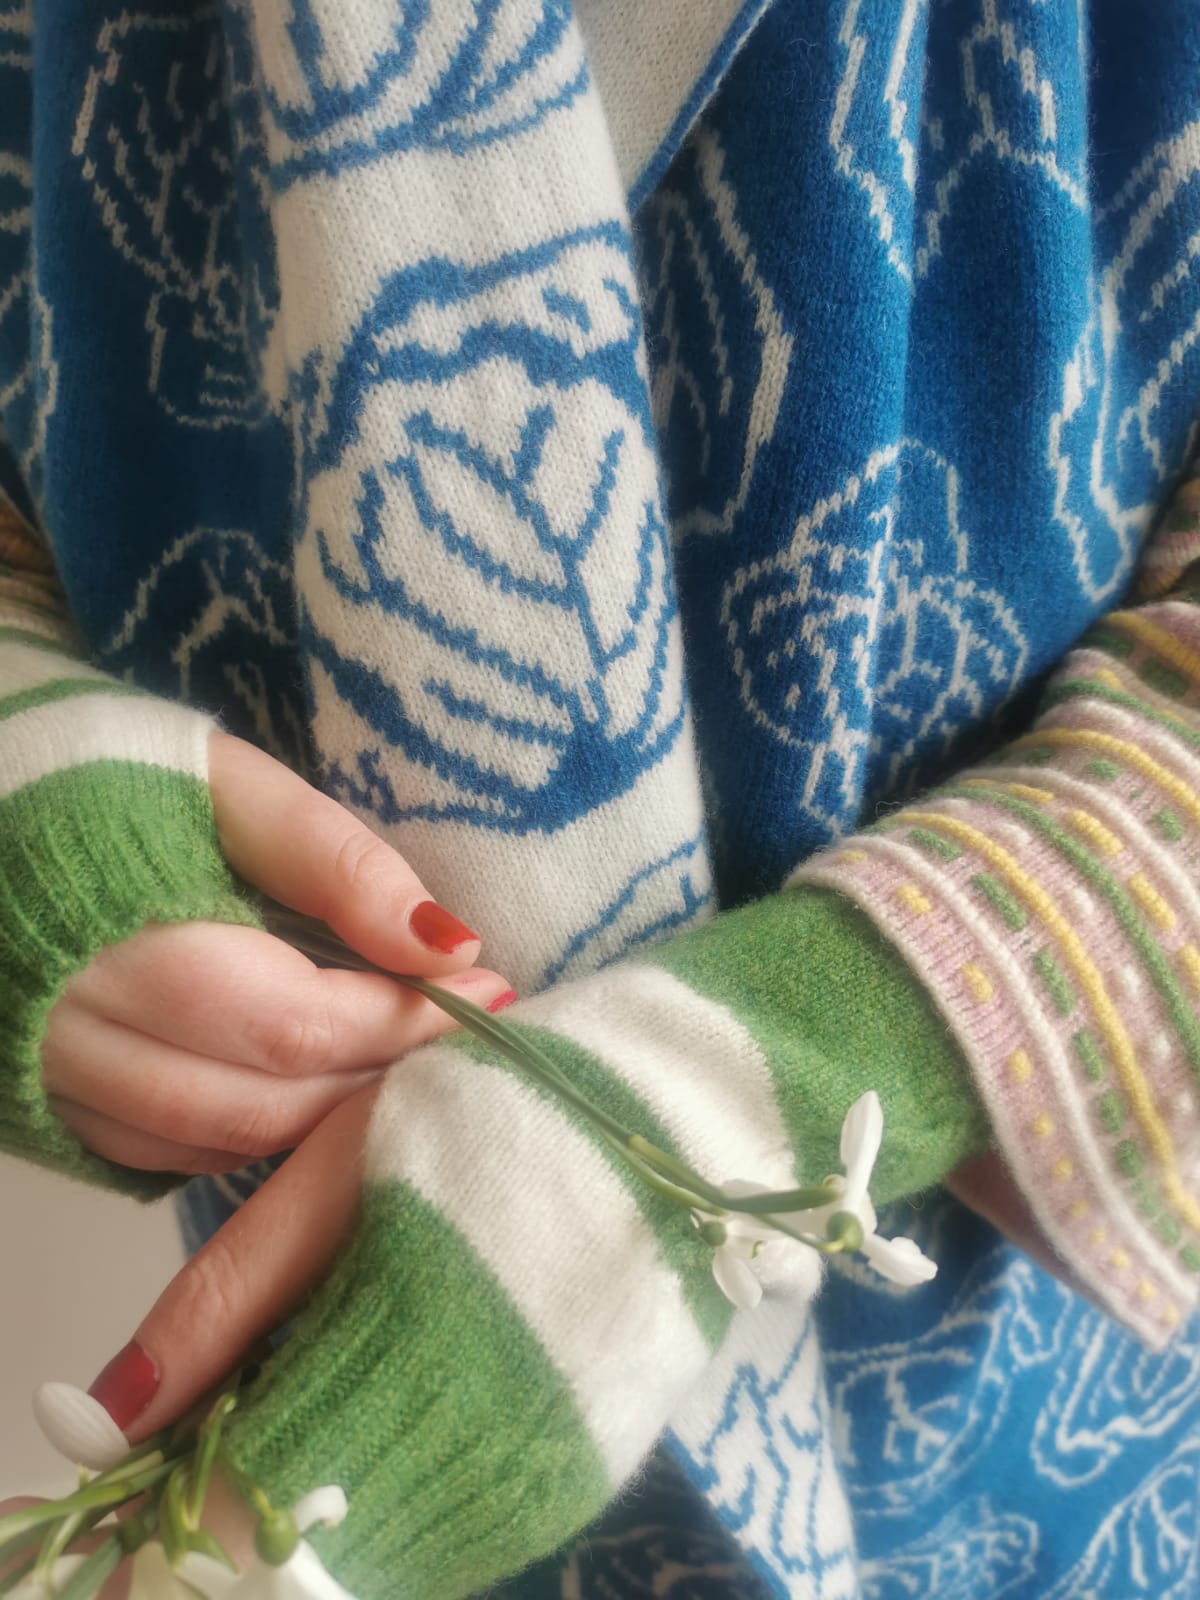 Muddle Bus 03 Pied Piper Wrist Warmers. Hands in front of blue and white knitted scarf with a pattern of cabbages (Muddle Bus 05). Hands wearing Green and white striped knitted fingerless gloves holding snowdrops.